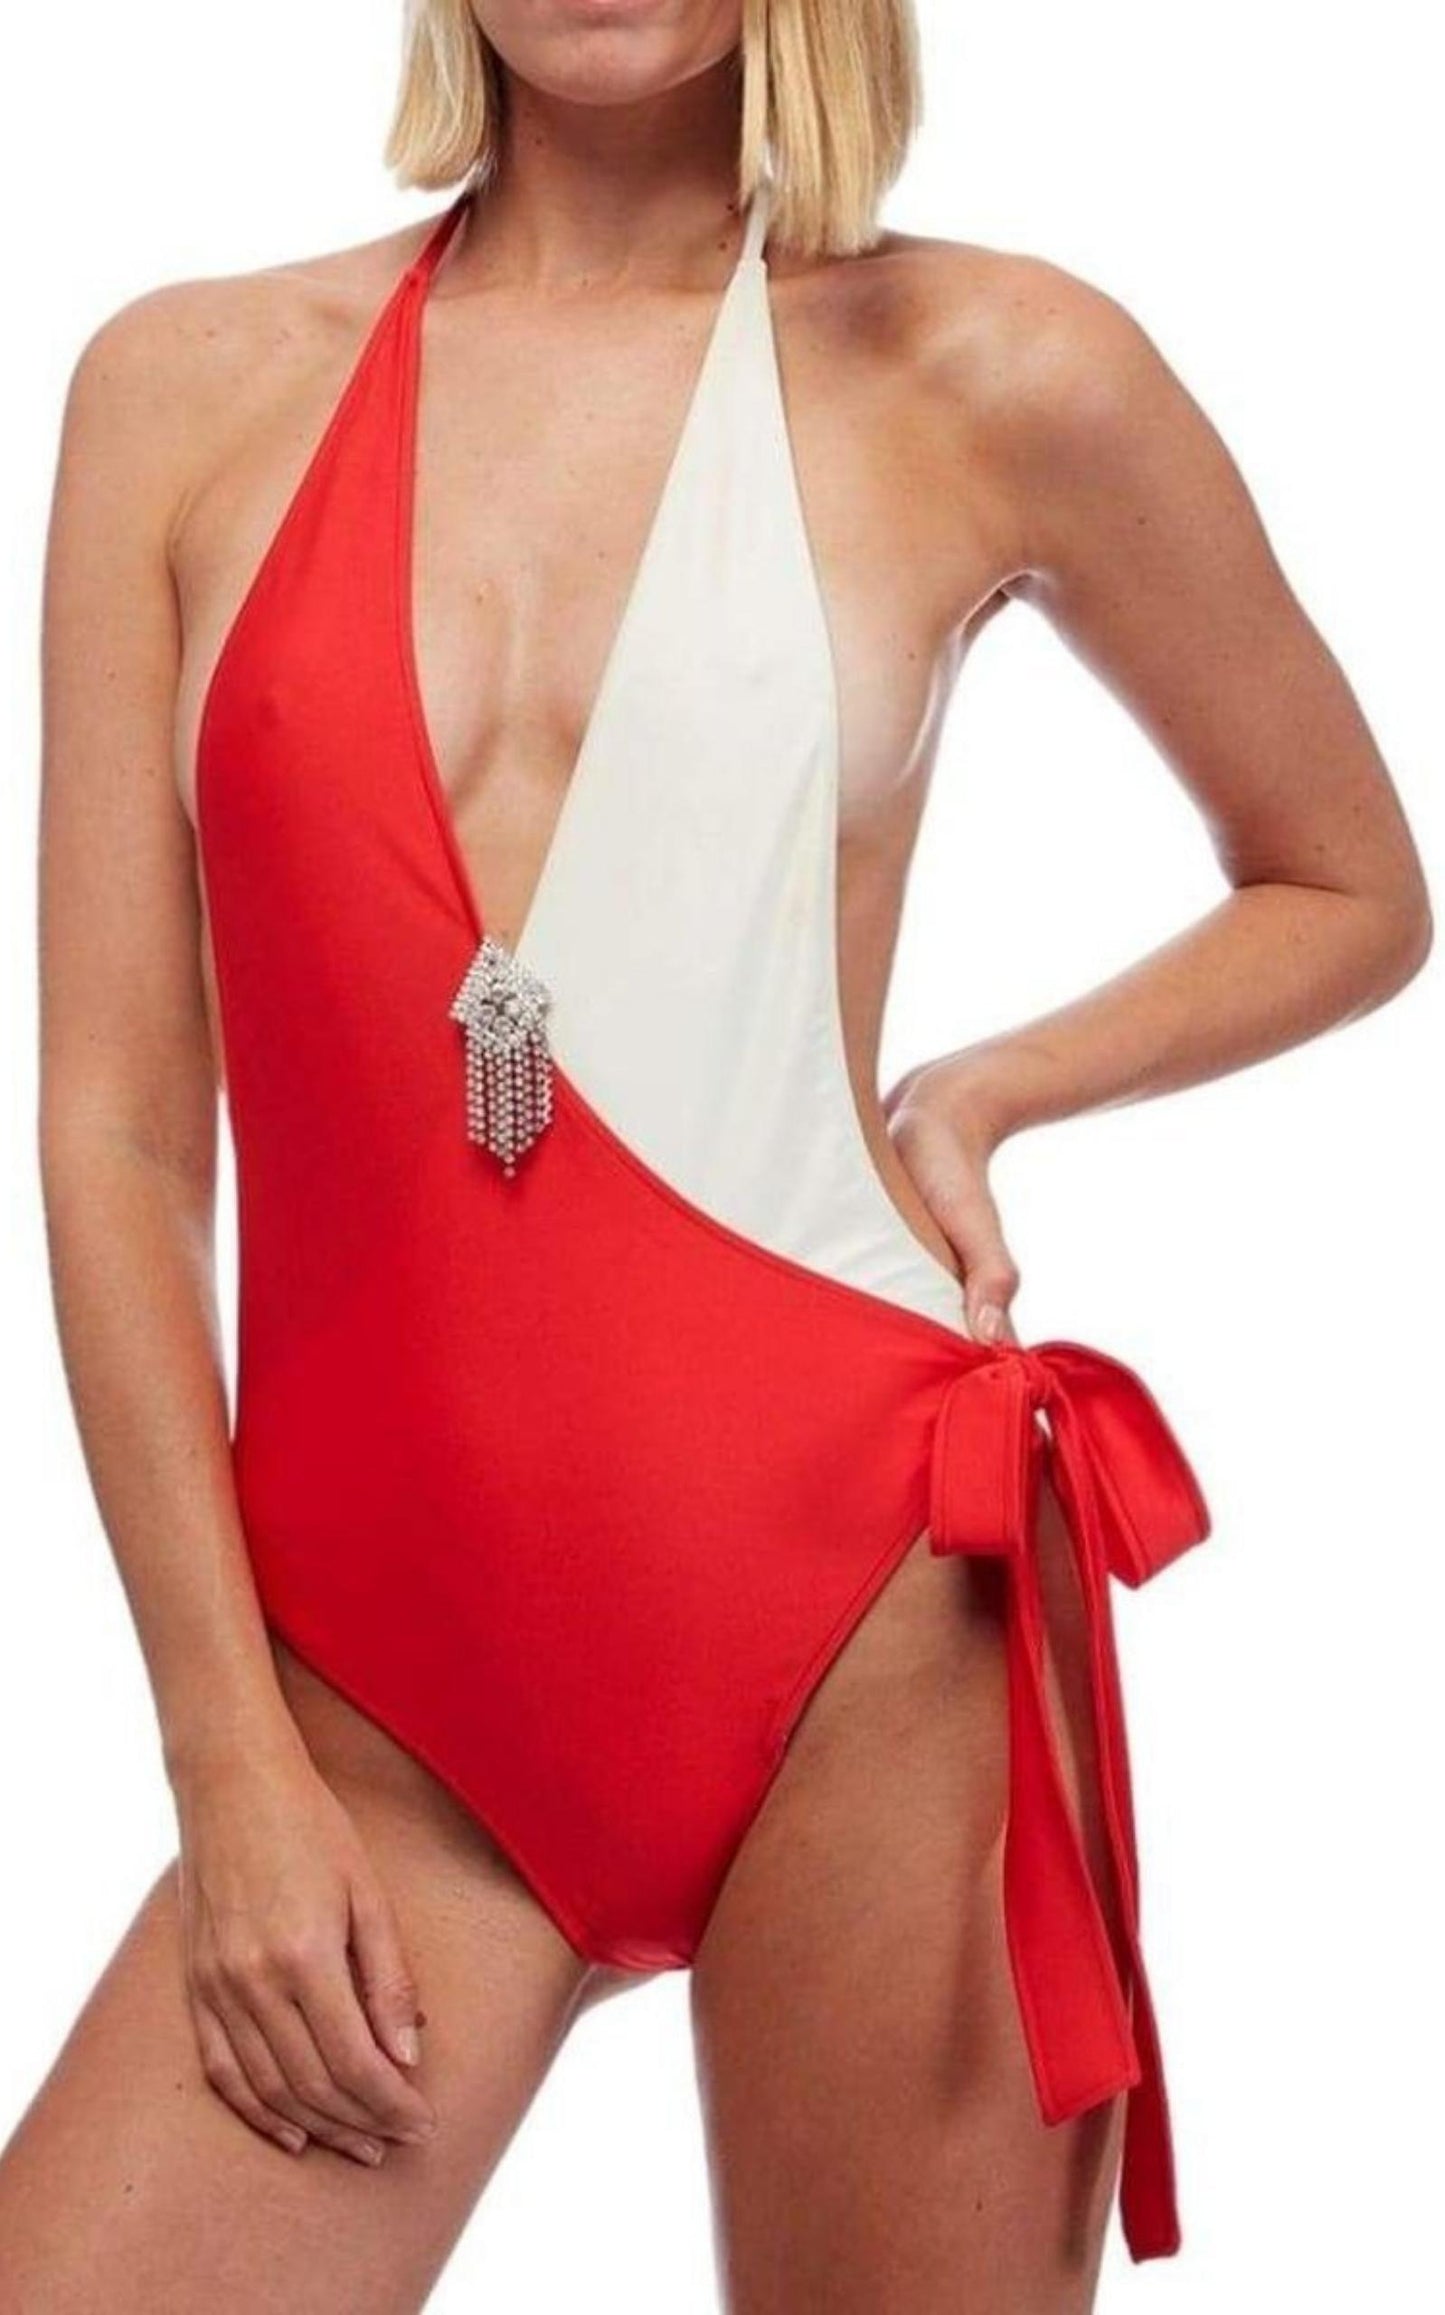  GucciEmbellished Colorblocked White & Red Swimsuit - Runway Catalog